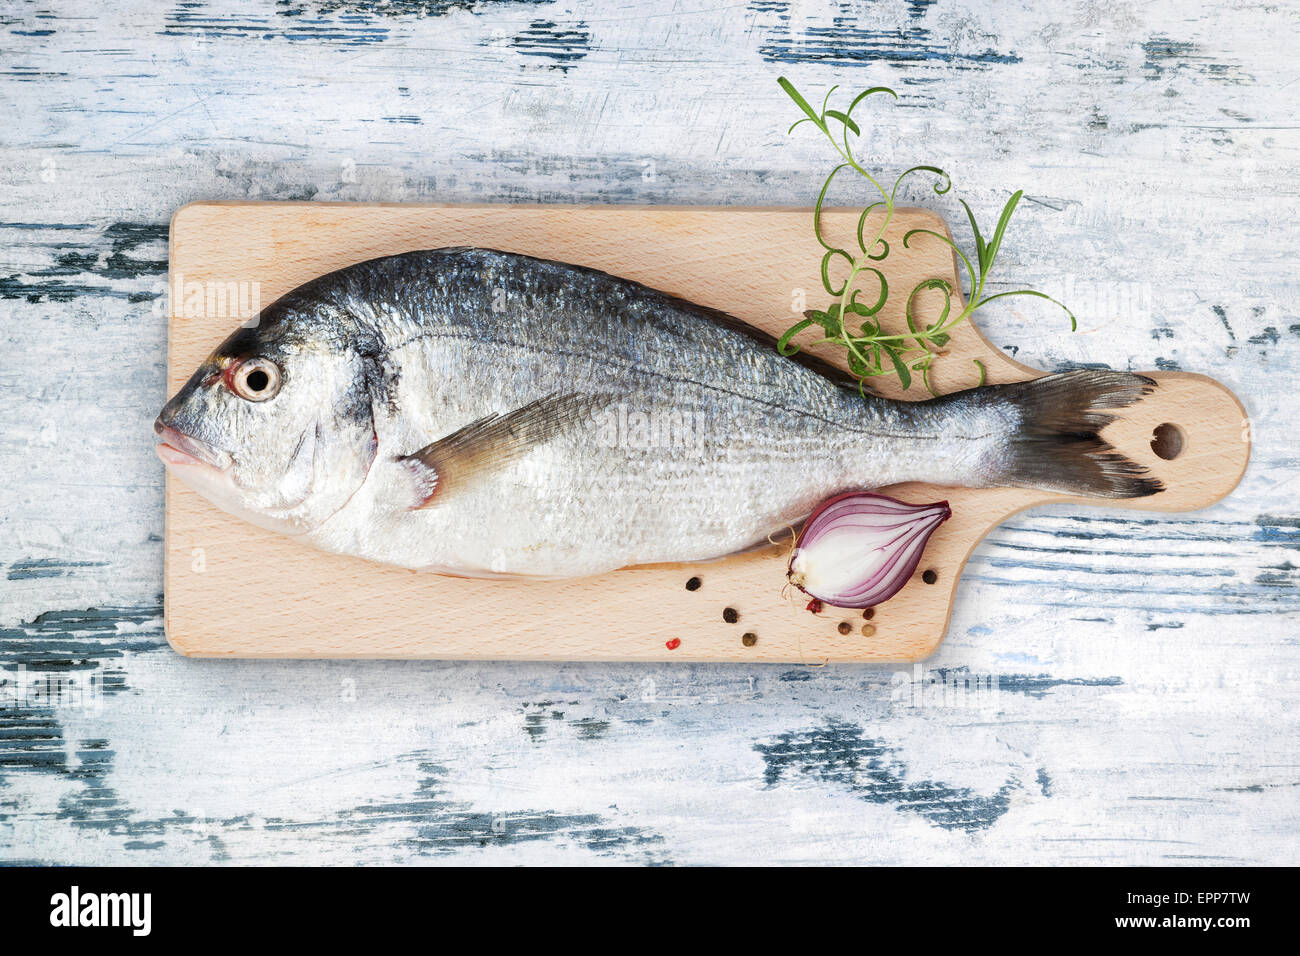 Delicious fresh sea bream fish on wooden kitchen board with onion, rosemary and colorful peppercorns on wooden board Stock Photo